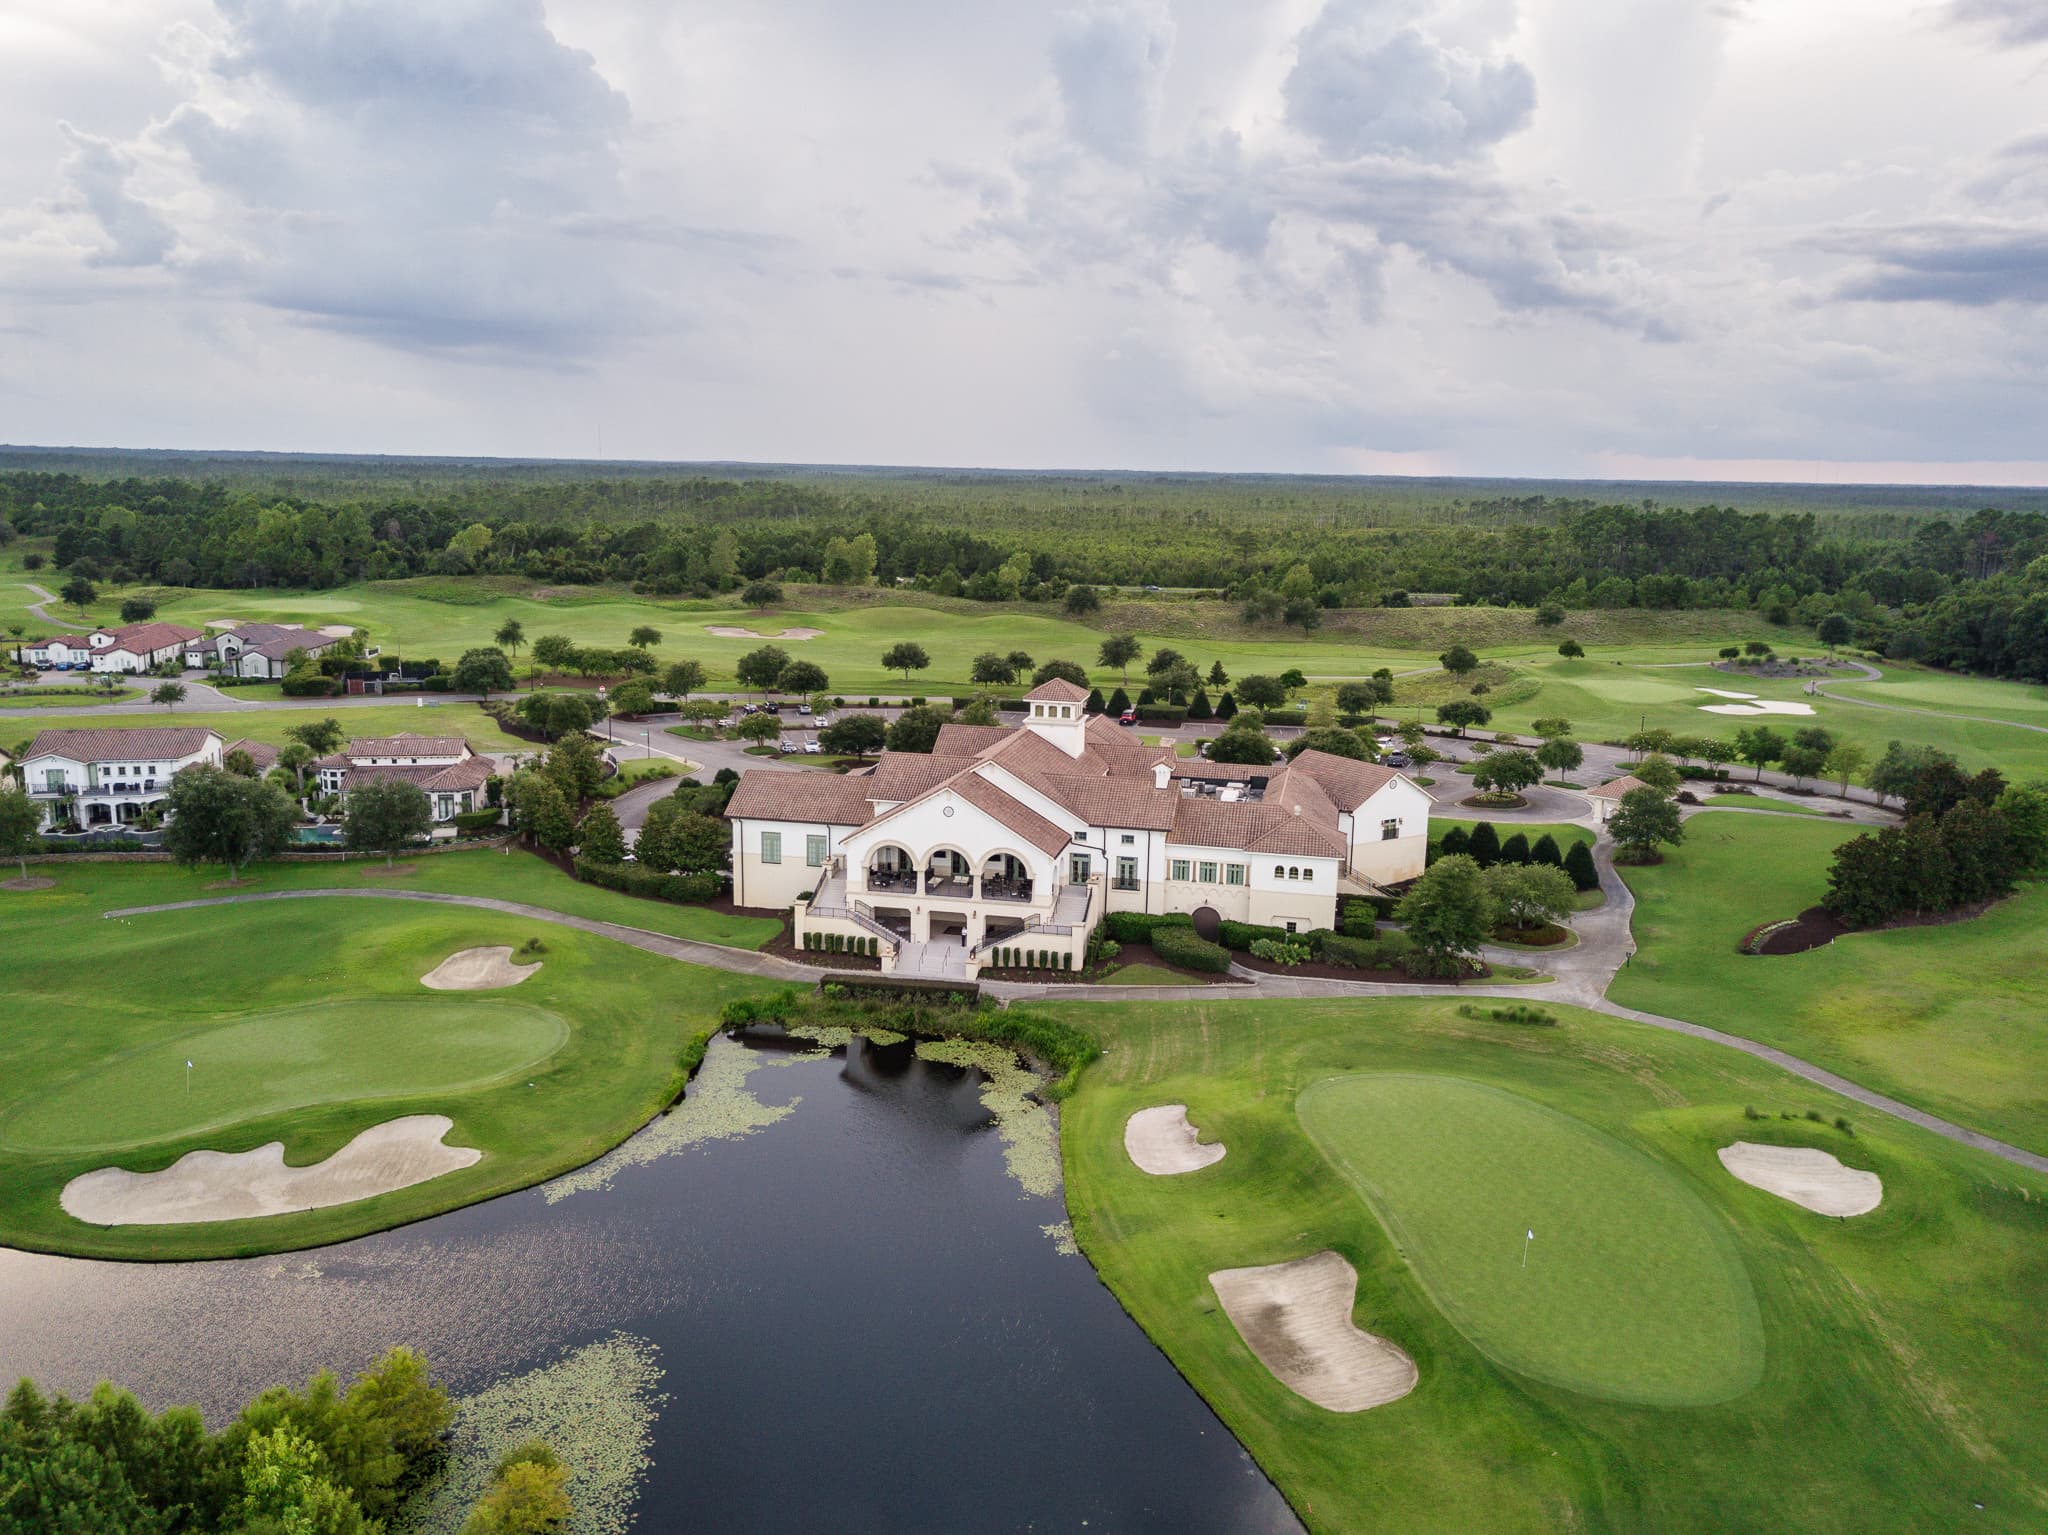 Aerial drone pictures of the clubhouse and golf course - Members Club at Grande Dunes